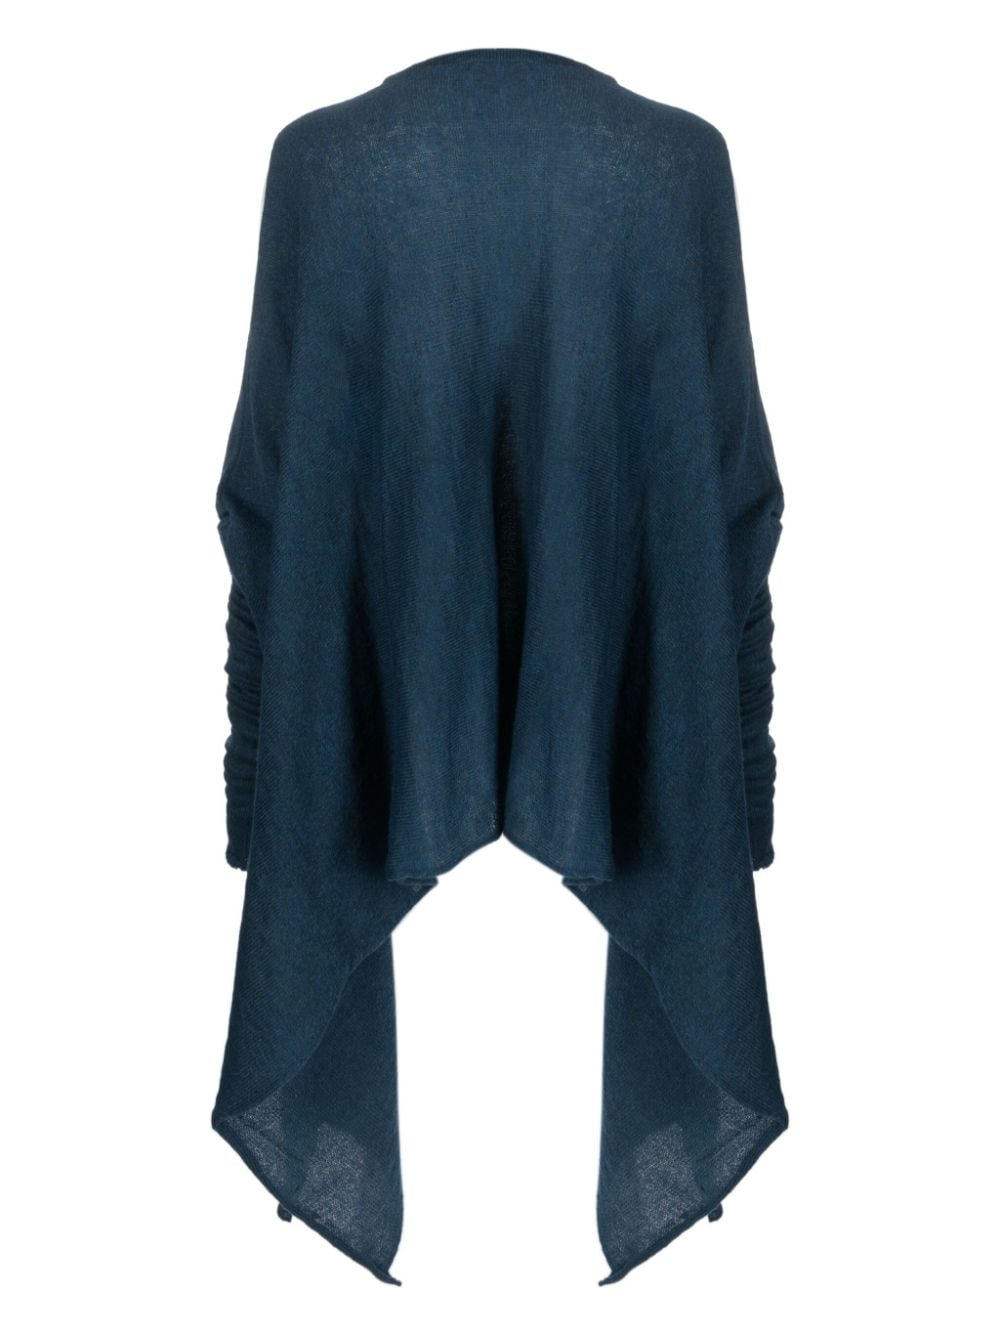 Barbara Bologna draped round-neck knitted top - Blauw